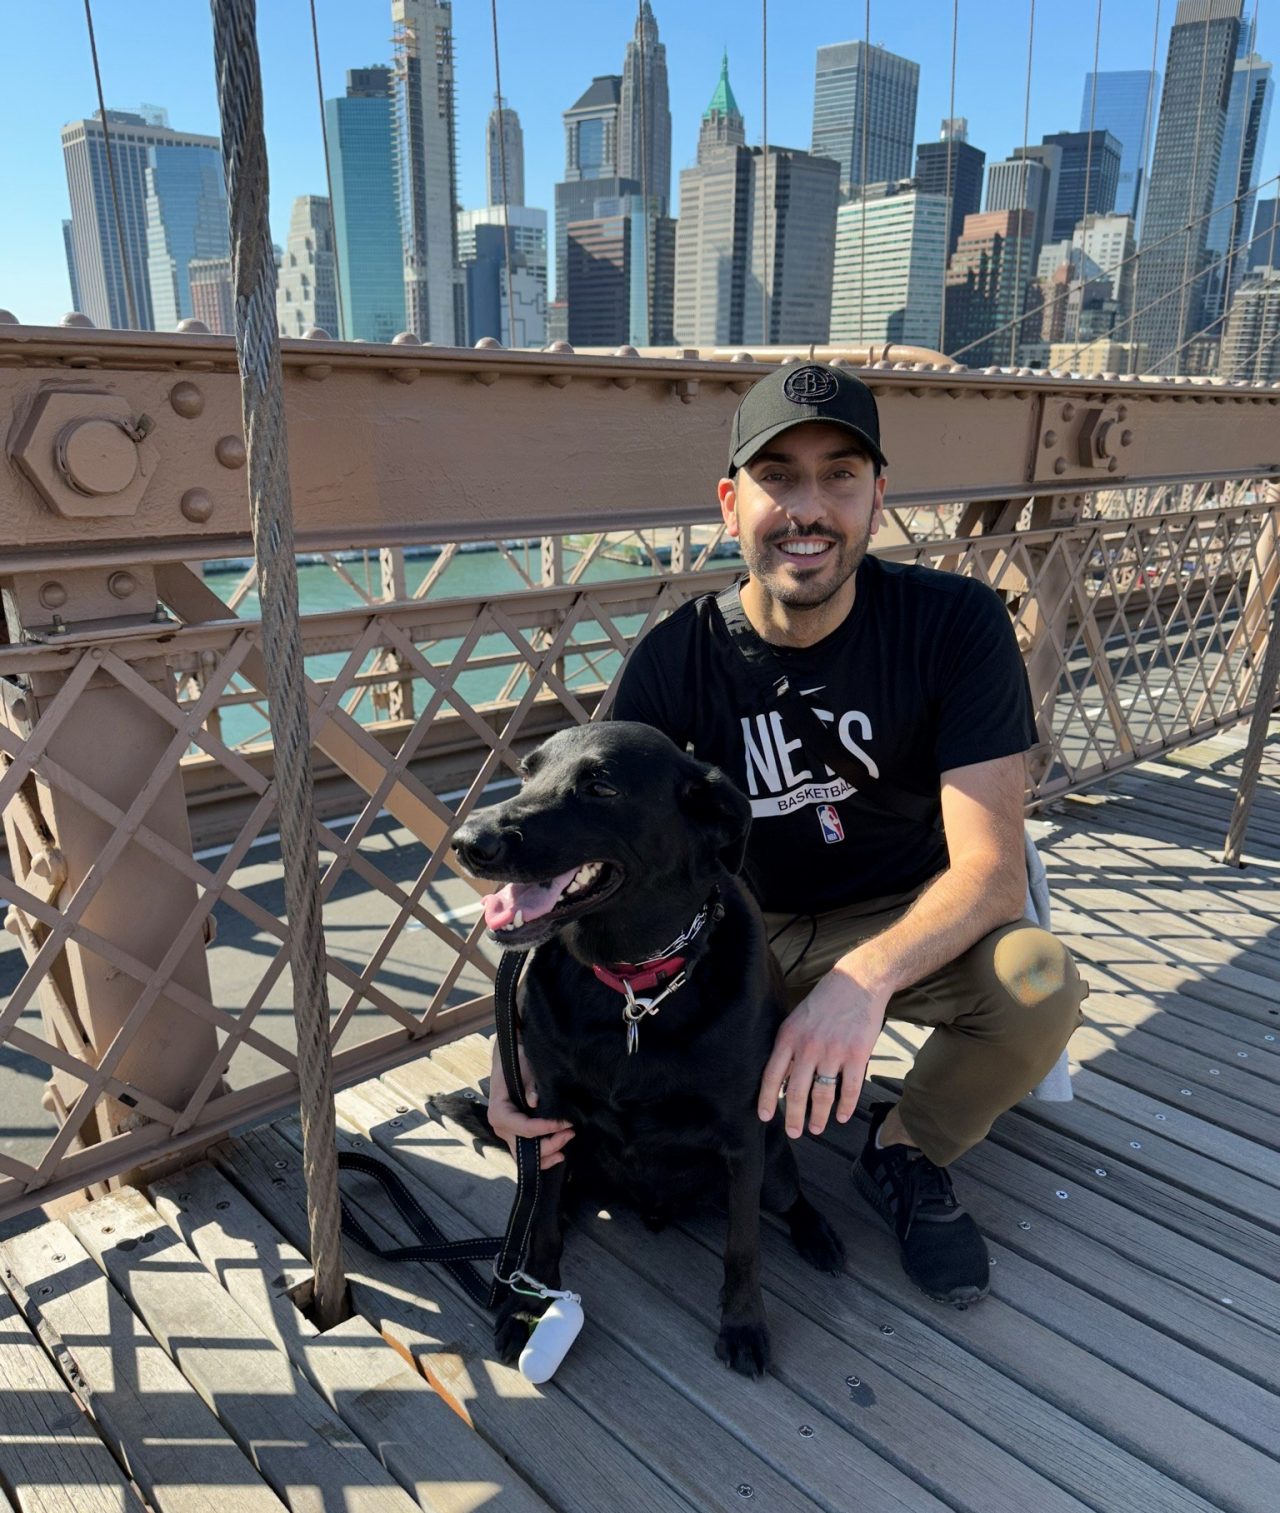 Ahluwalia is crouched on the bridge smiling with a black dog and the Brooklyn skyline in the background.